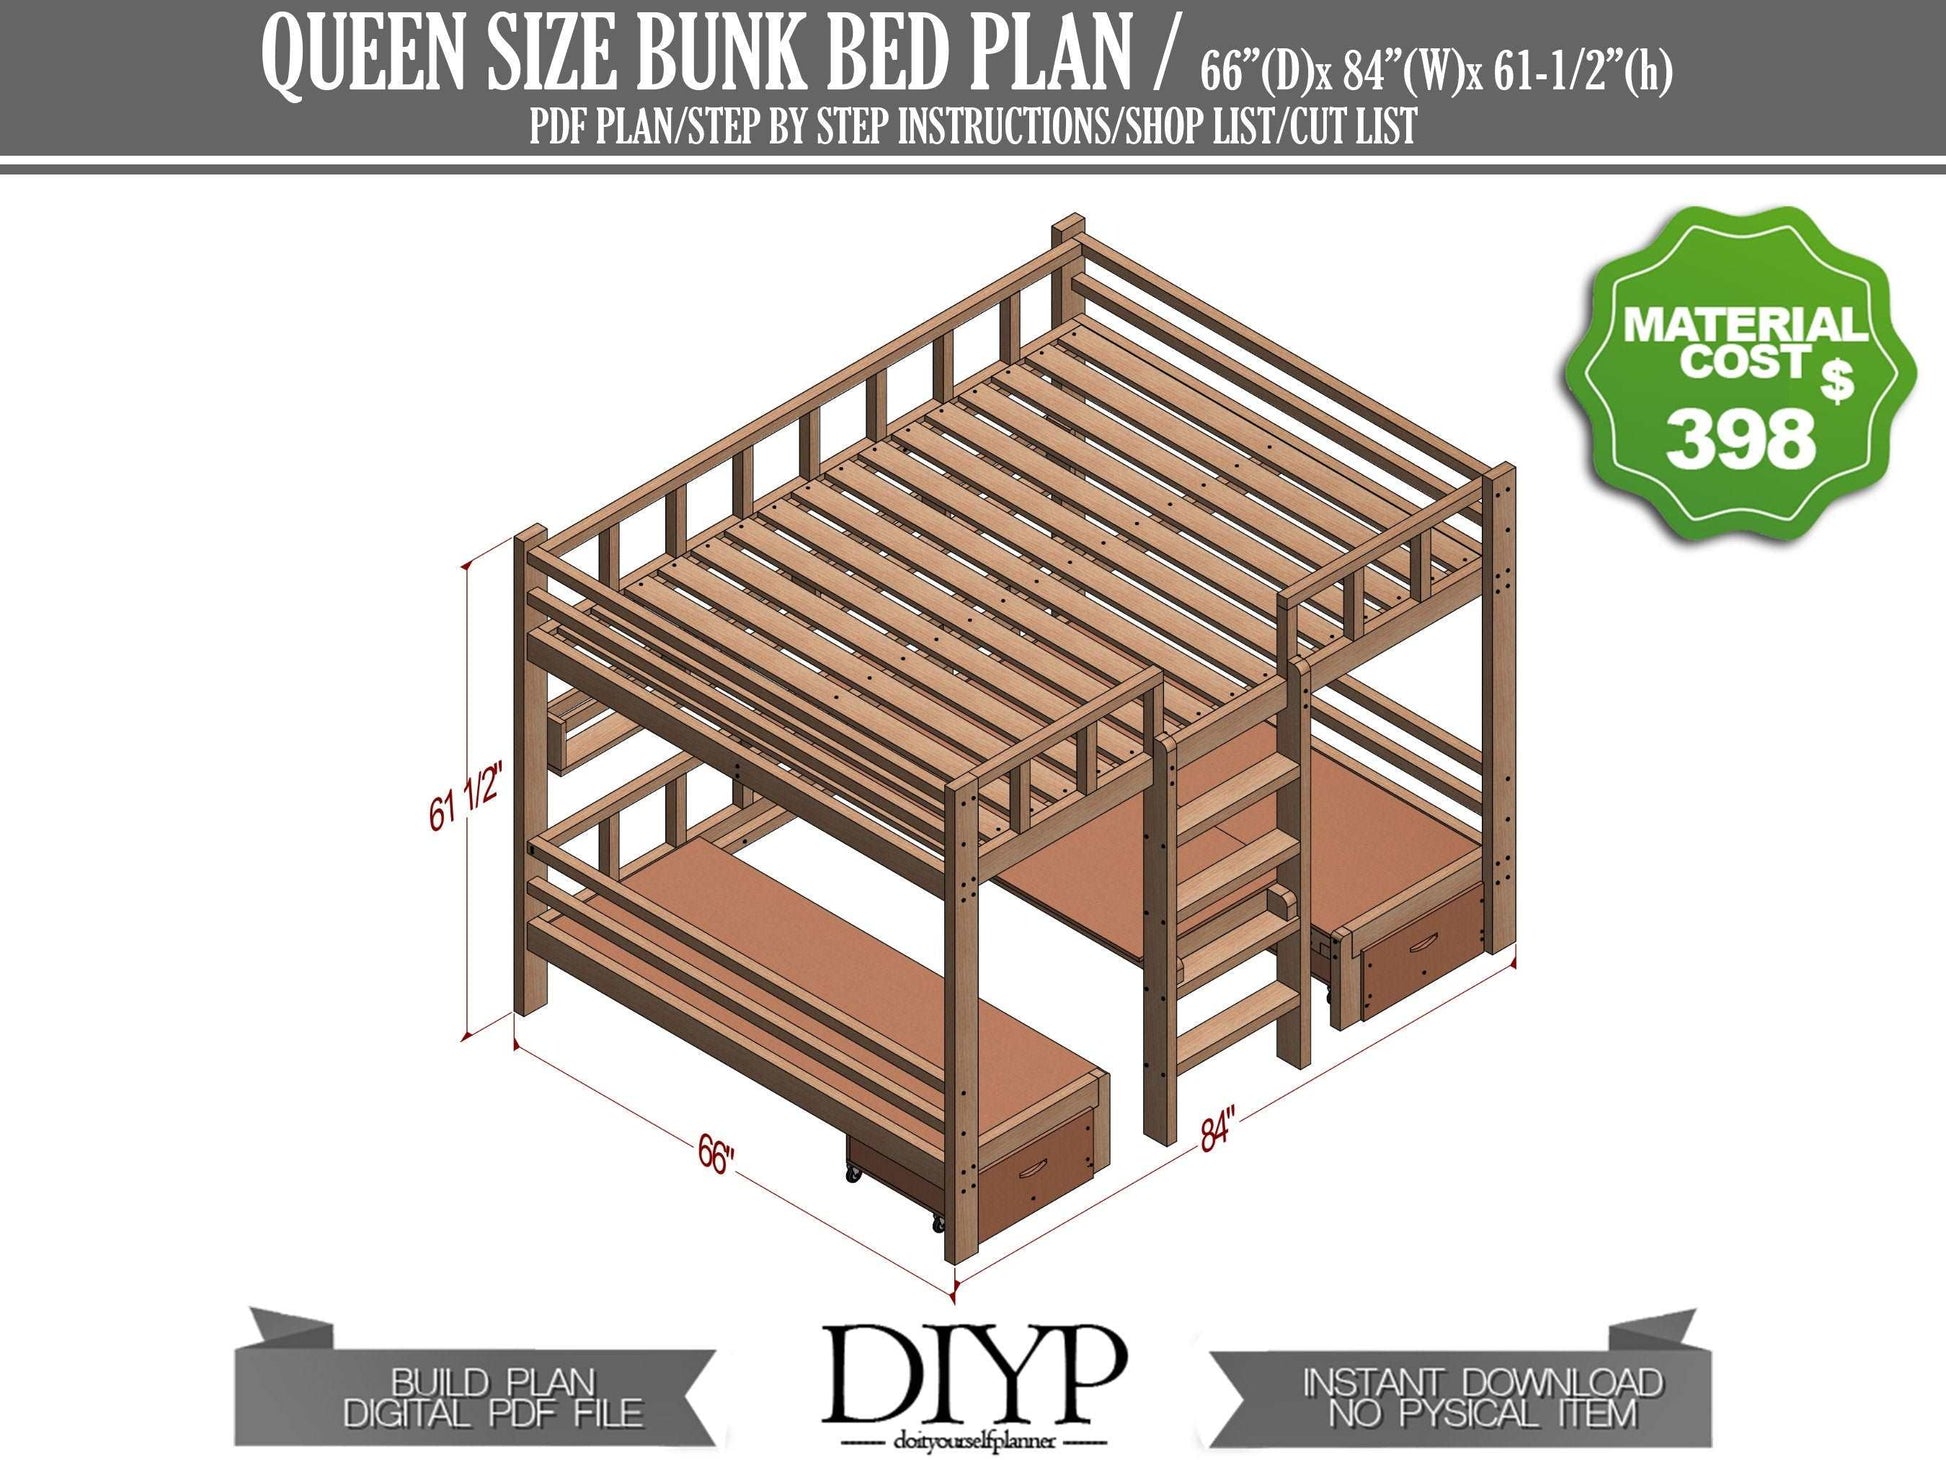 Multifunctional bunk bed with table - Modern study room ideas build plans - queen size loft bed